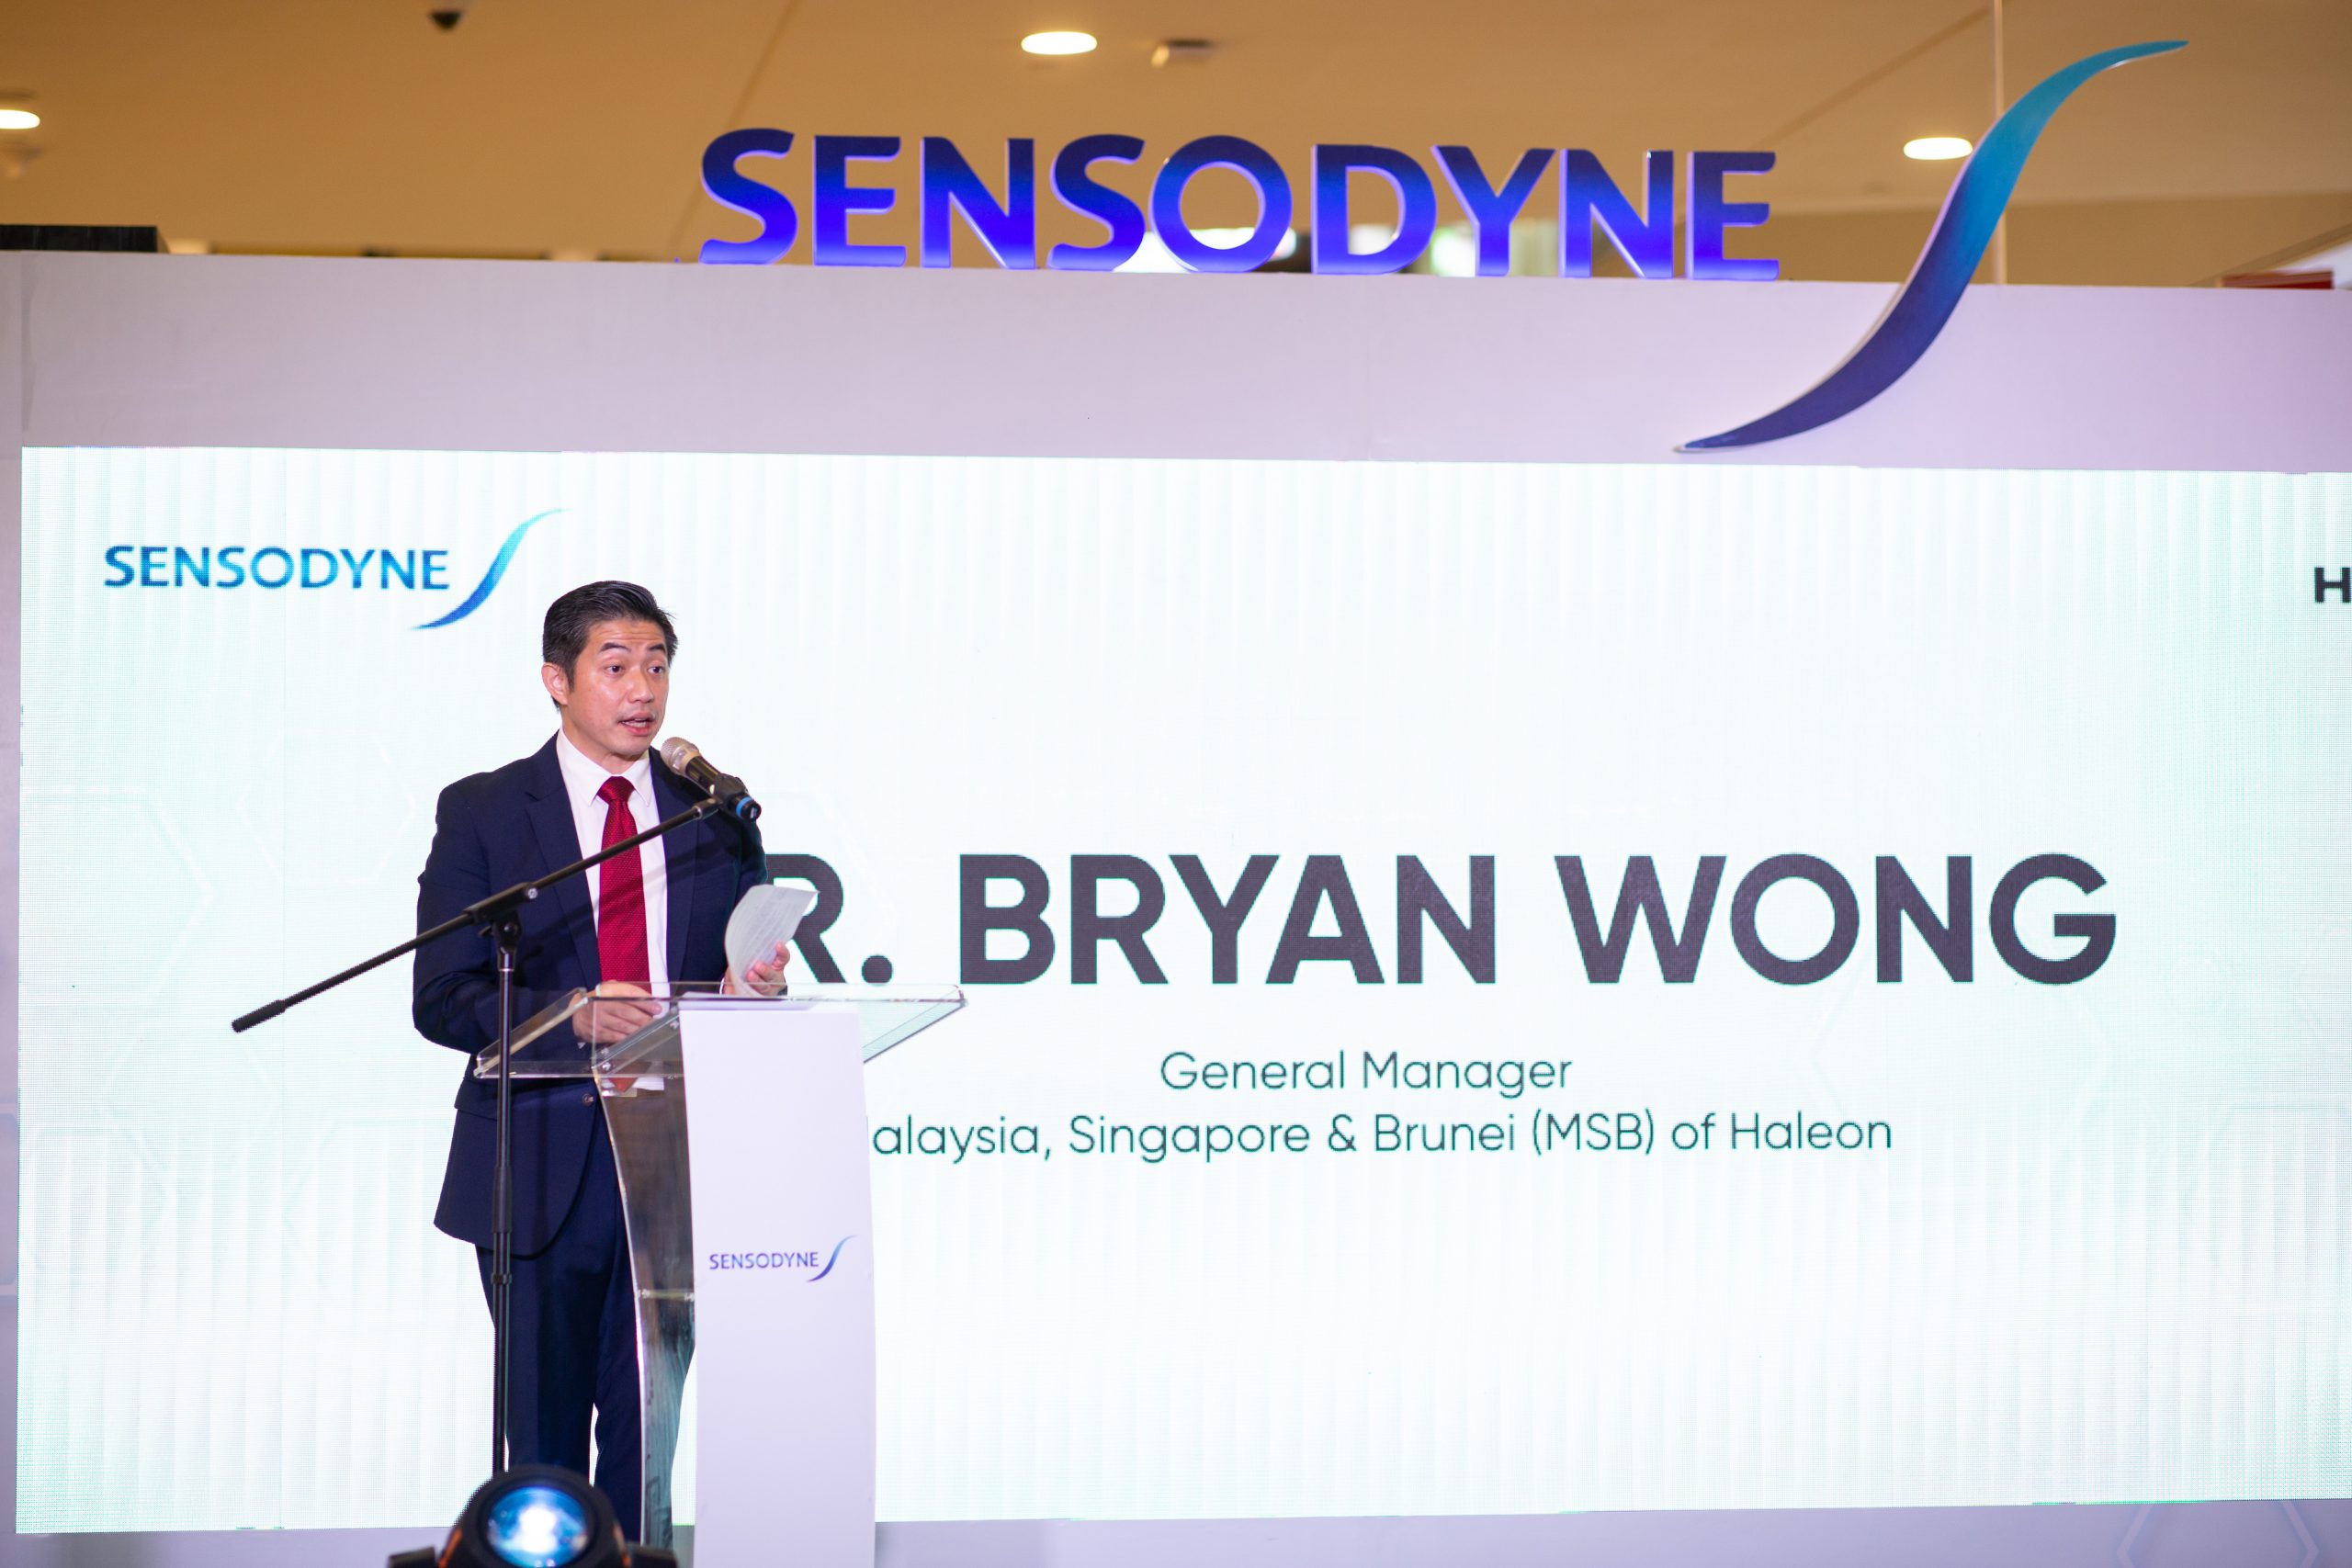 Bryan Wong, General Manager, Malaysia, Singapore and Brunei (MSB), Haleon giving an opening speech at a Sensodyne event